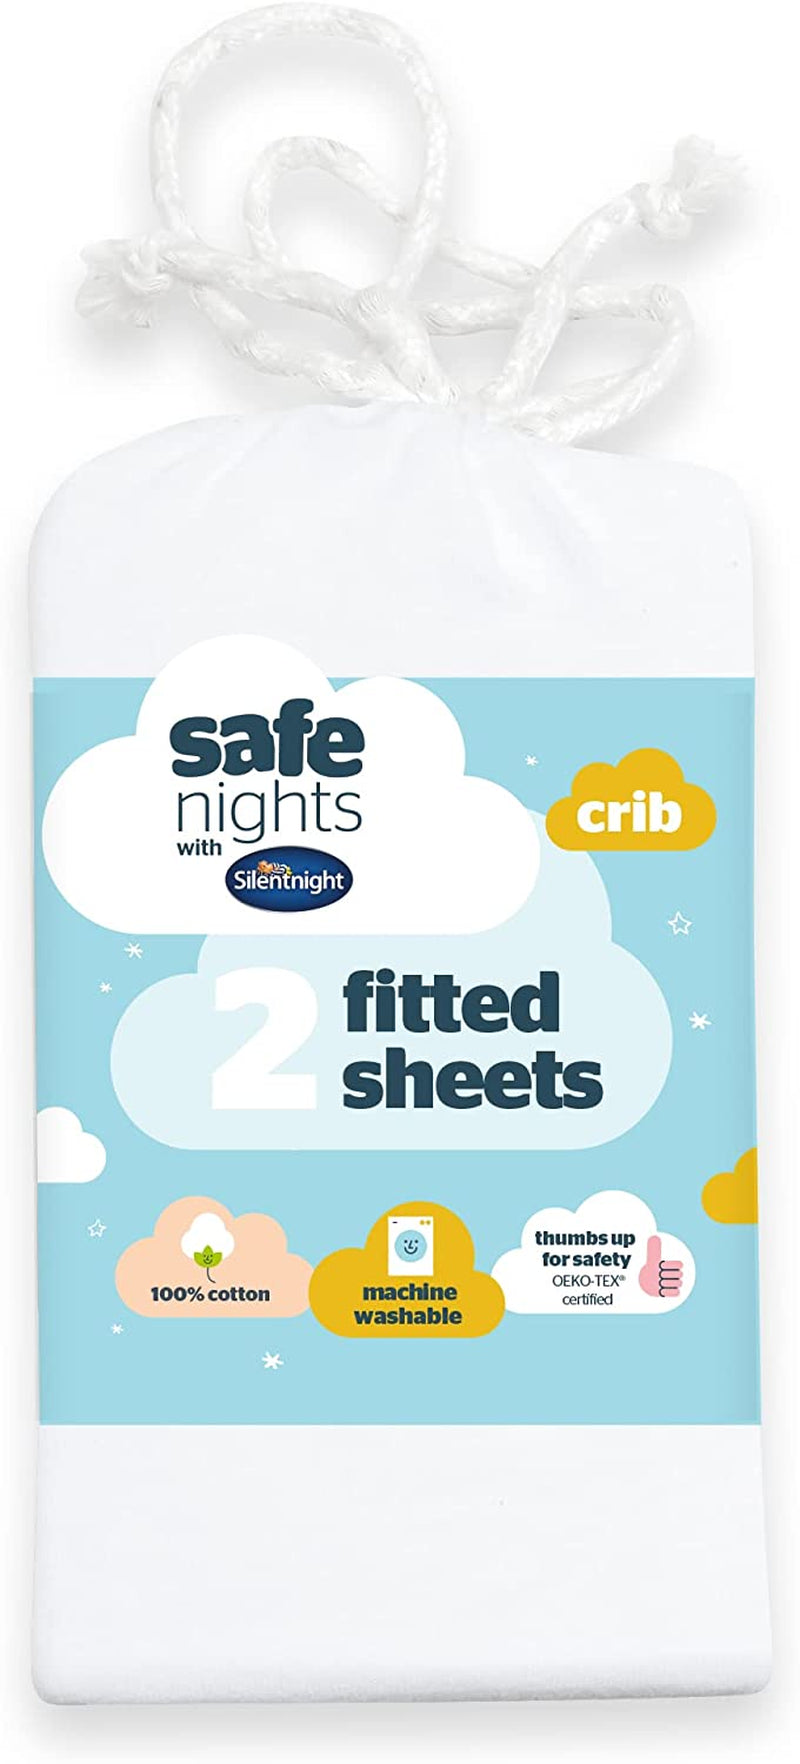 Silentnight Safe Nights Cot Bed Size Fitted Sheets Set 100% Jersey Cotton Bedside Compatible Pack of Two Grey Star easy Care Super Soft Cuddly for Baby with Storage Bag (120cm x60cm x 12cm)